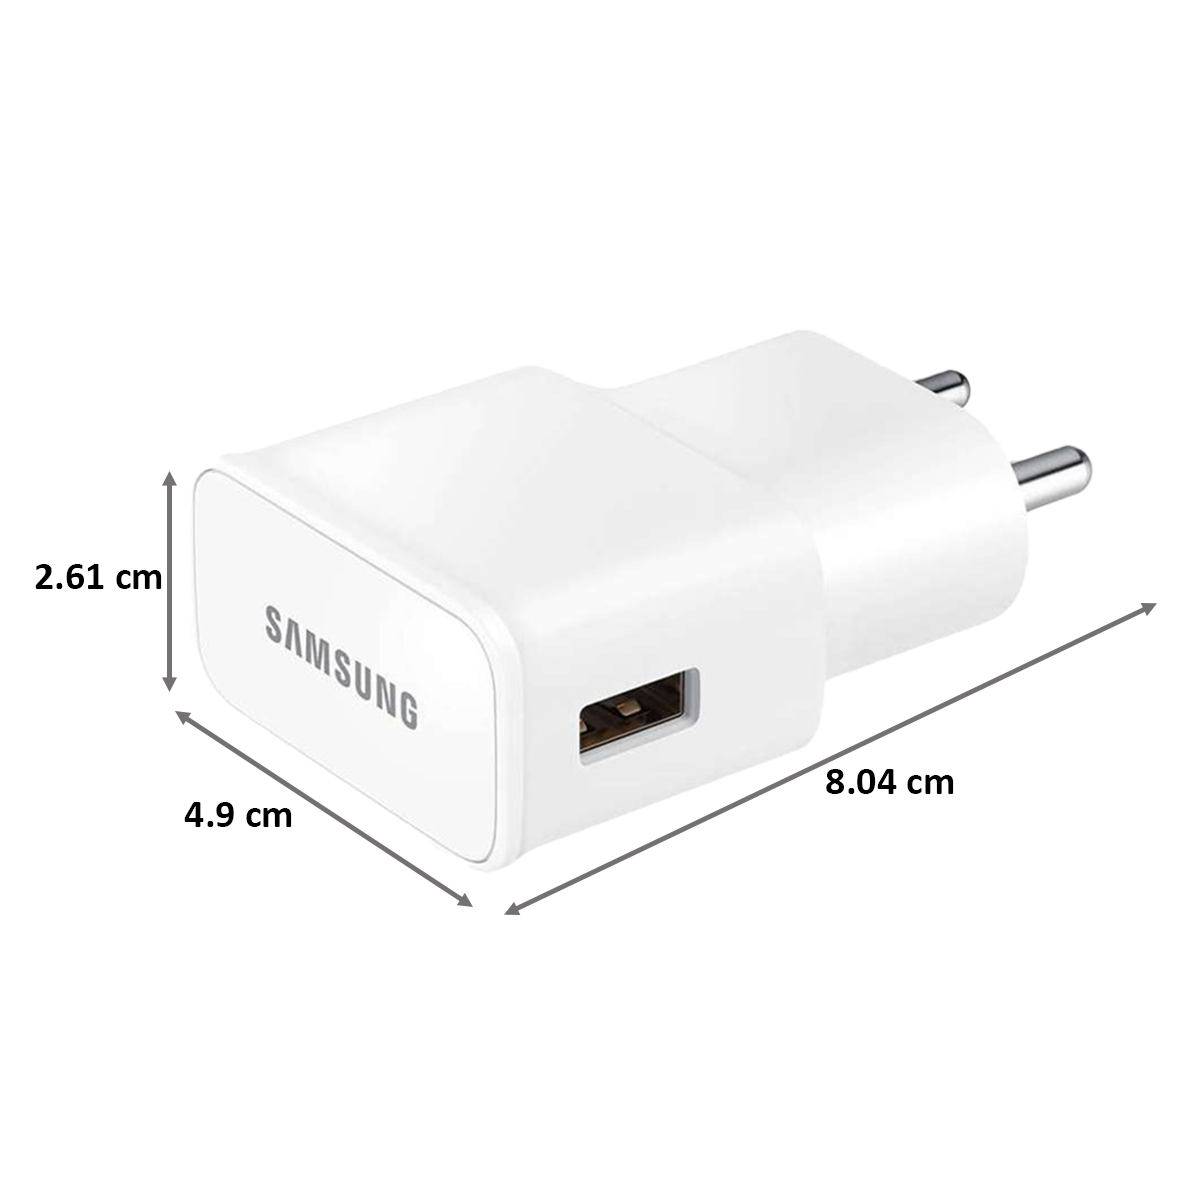 Samsung 2 Amp Wall Travel Adapter with Cable (EP-TA13IWEUGIN, White)_2